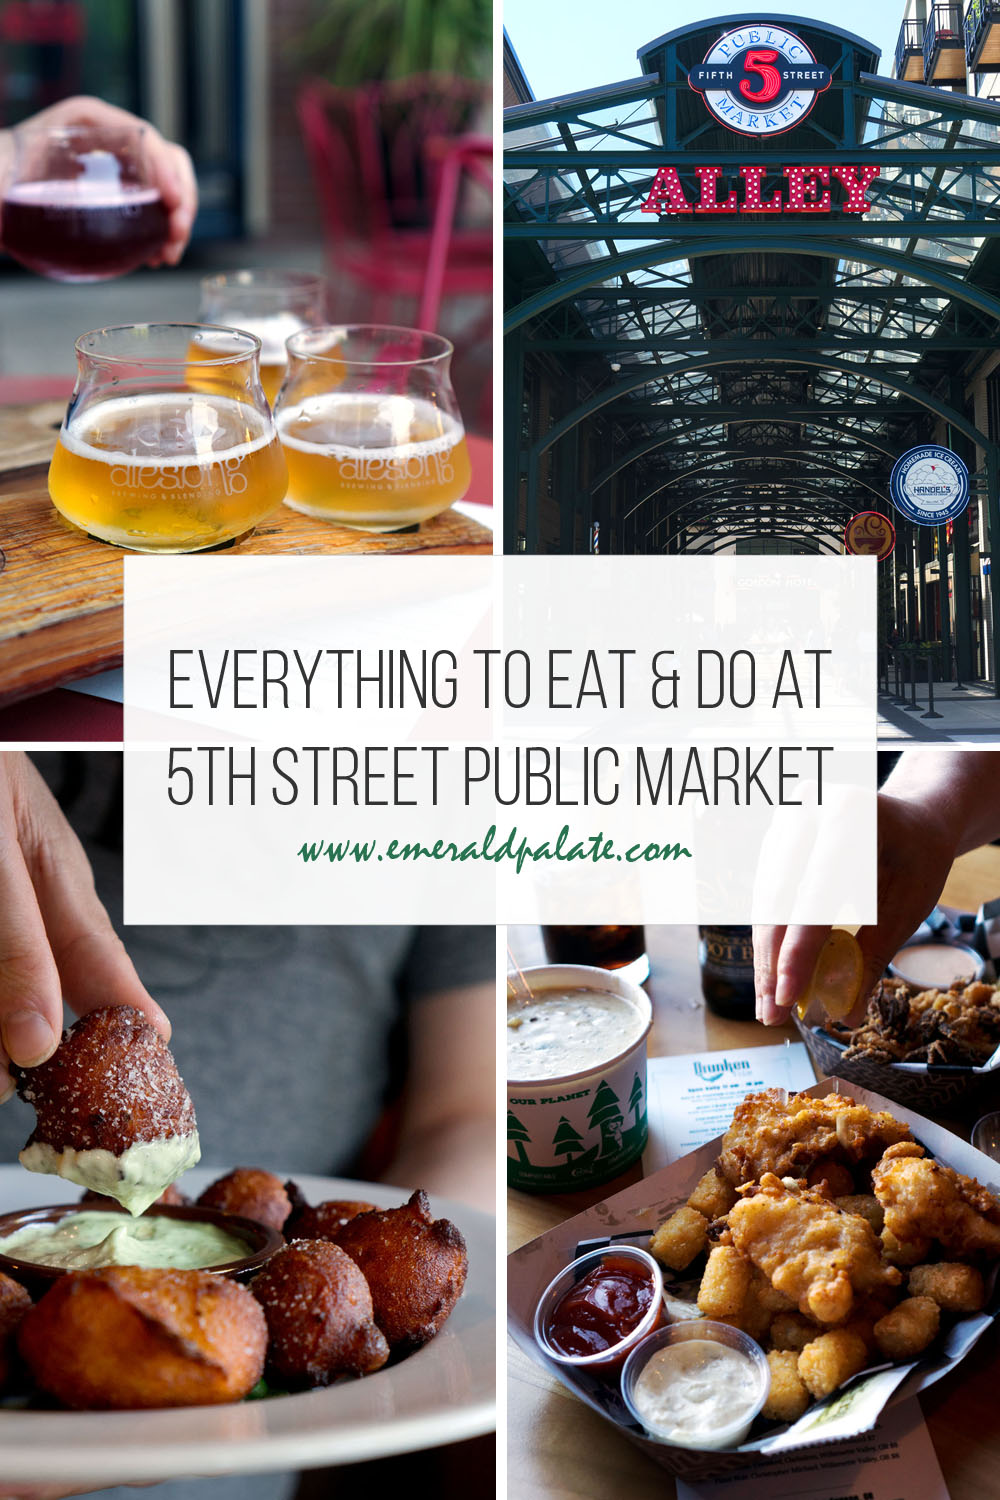 Everything to eat, see, and do in 5th Street Public Market in Eugene, Oregon. This open air market is one of the best things to do in Eugene. It has some of the best Eugene restaurants, Eugene wineries, and a ton of shops perfect for souvenirs. If you are looking for what to do in Eugene, make sure this market in downtown Eugene is it!